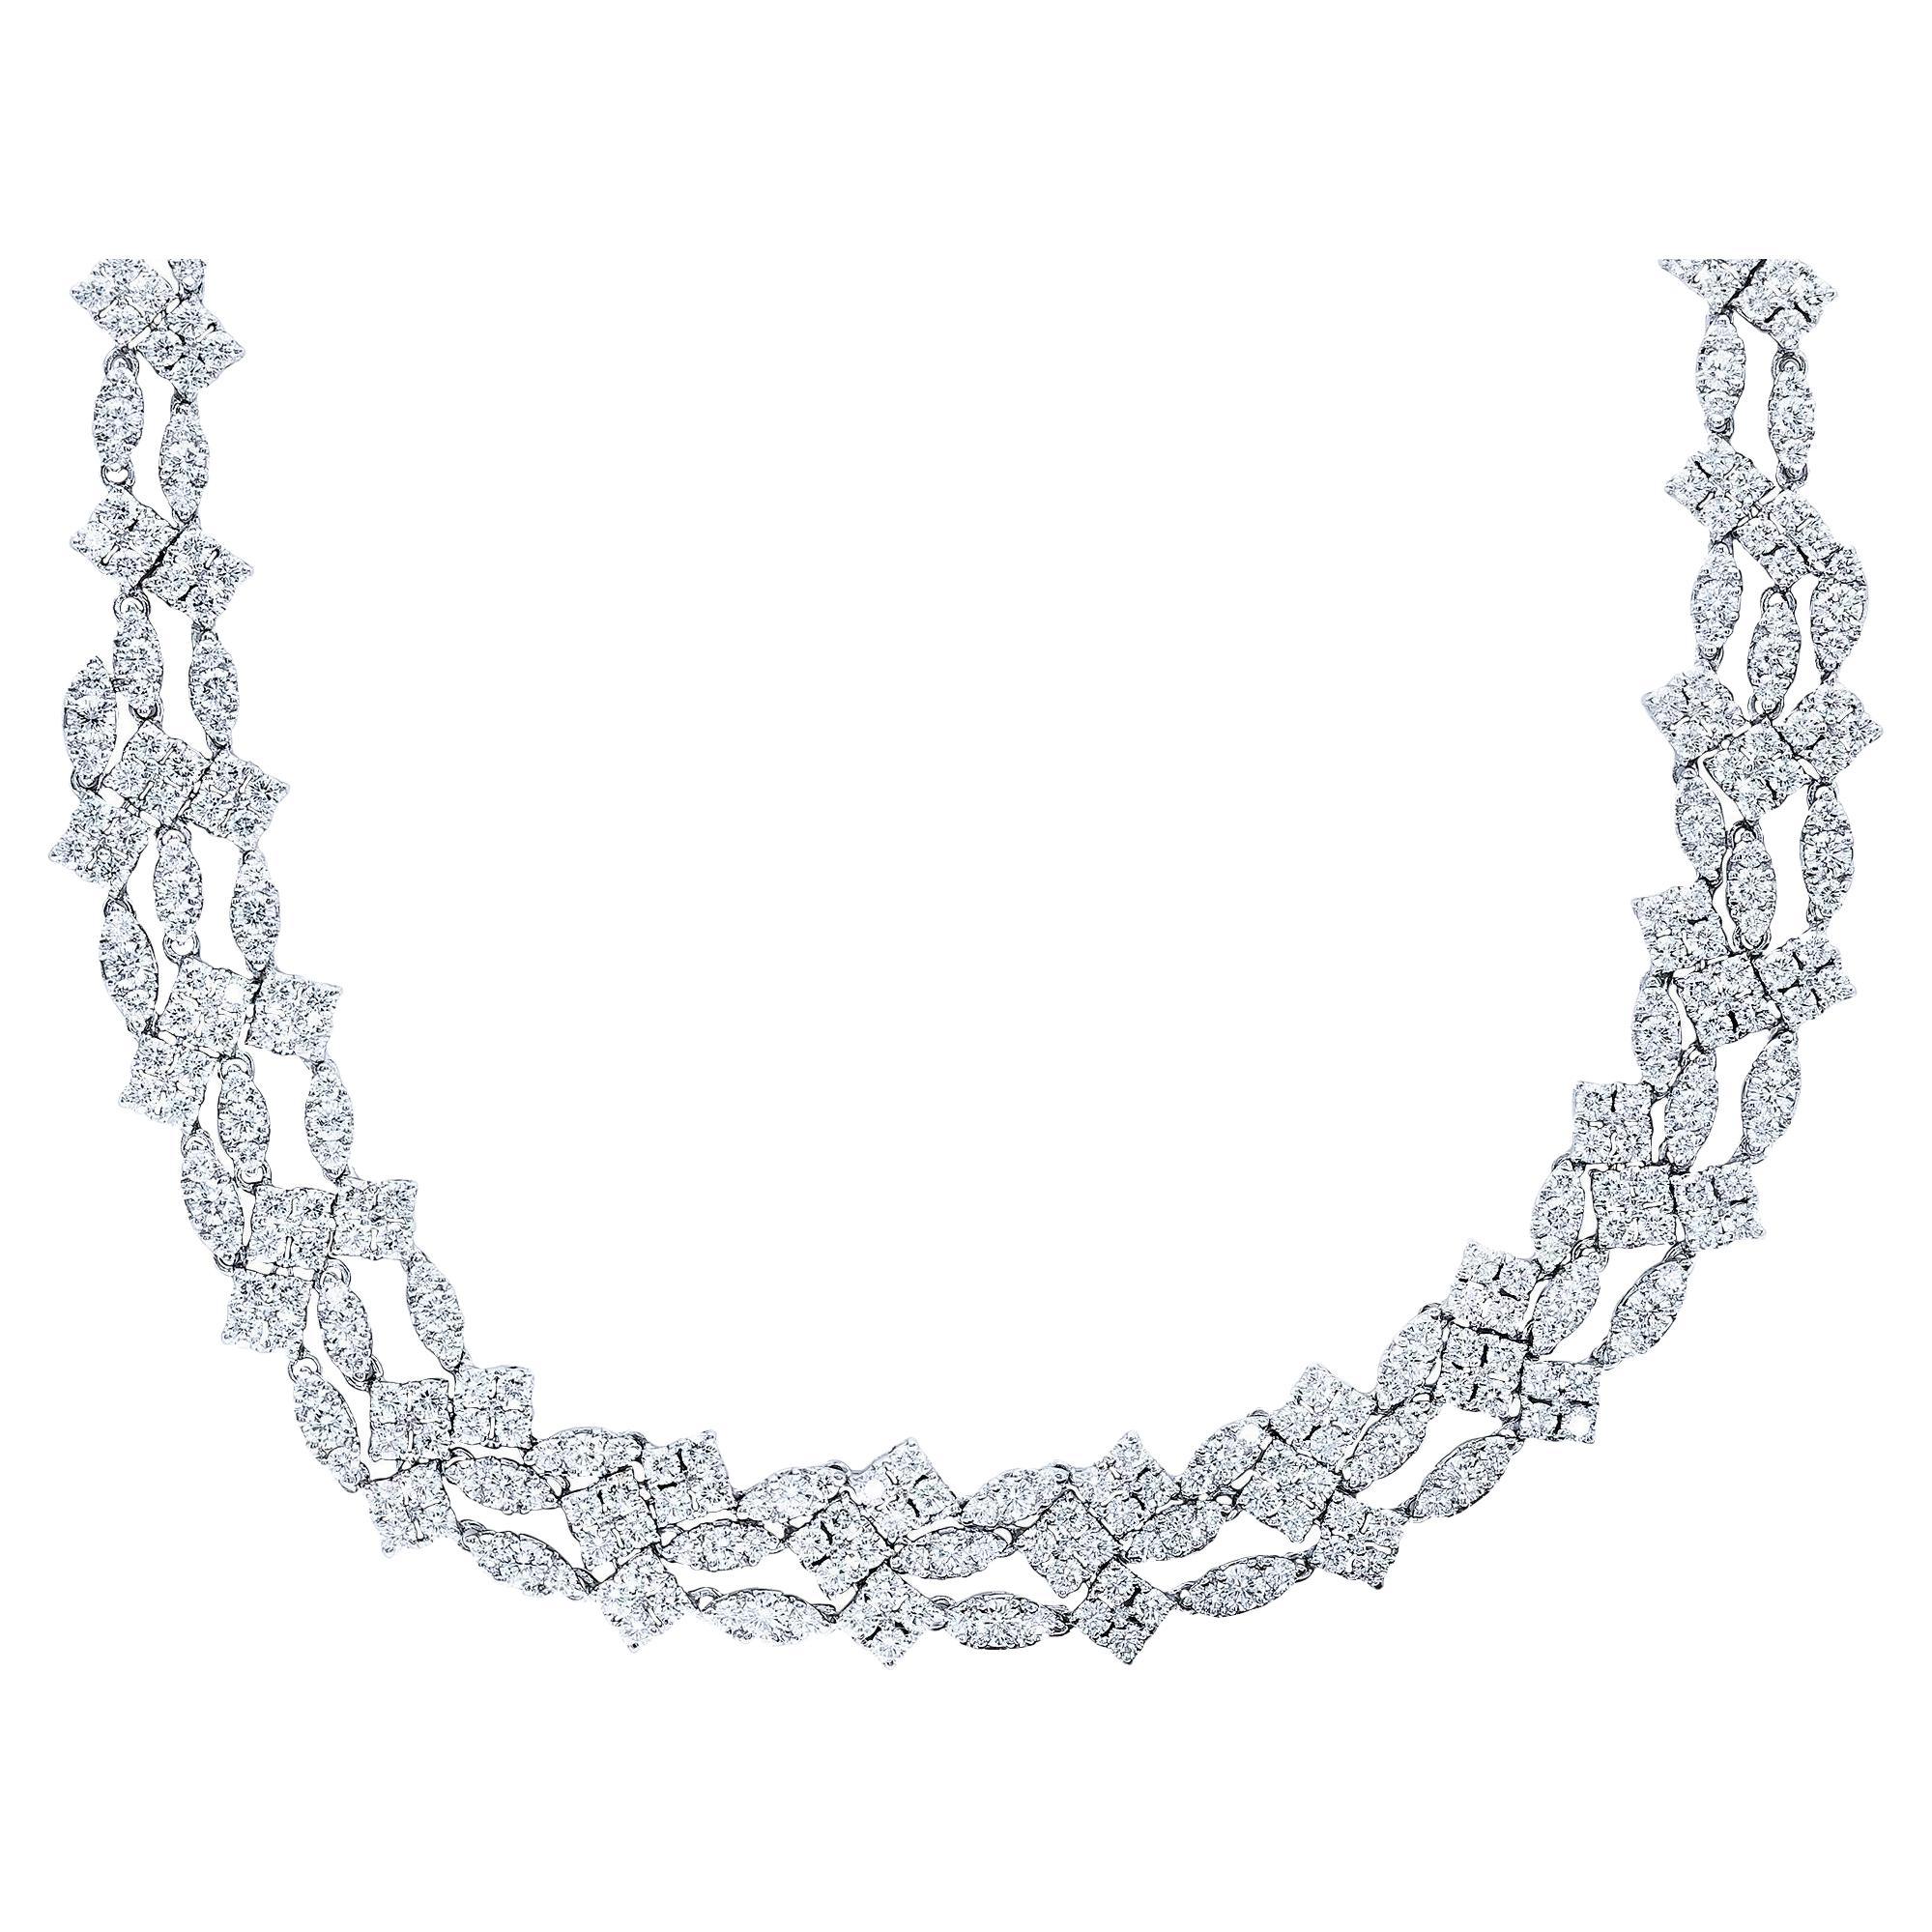 Sidney Garber's Vintage 35 Ct Diamond Bridal Necklace 18 Karat White Gold 60 Gm
One of our premium necklace from our Bridal collection.
Approximately 35 carats of VS1 quality of Diamonds all mounted in 18 karat gold. Weight of the gold is 60